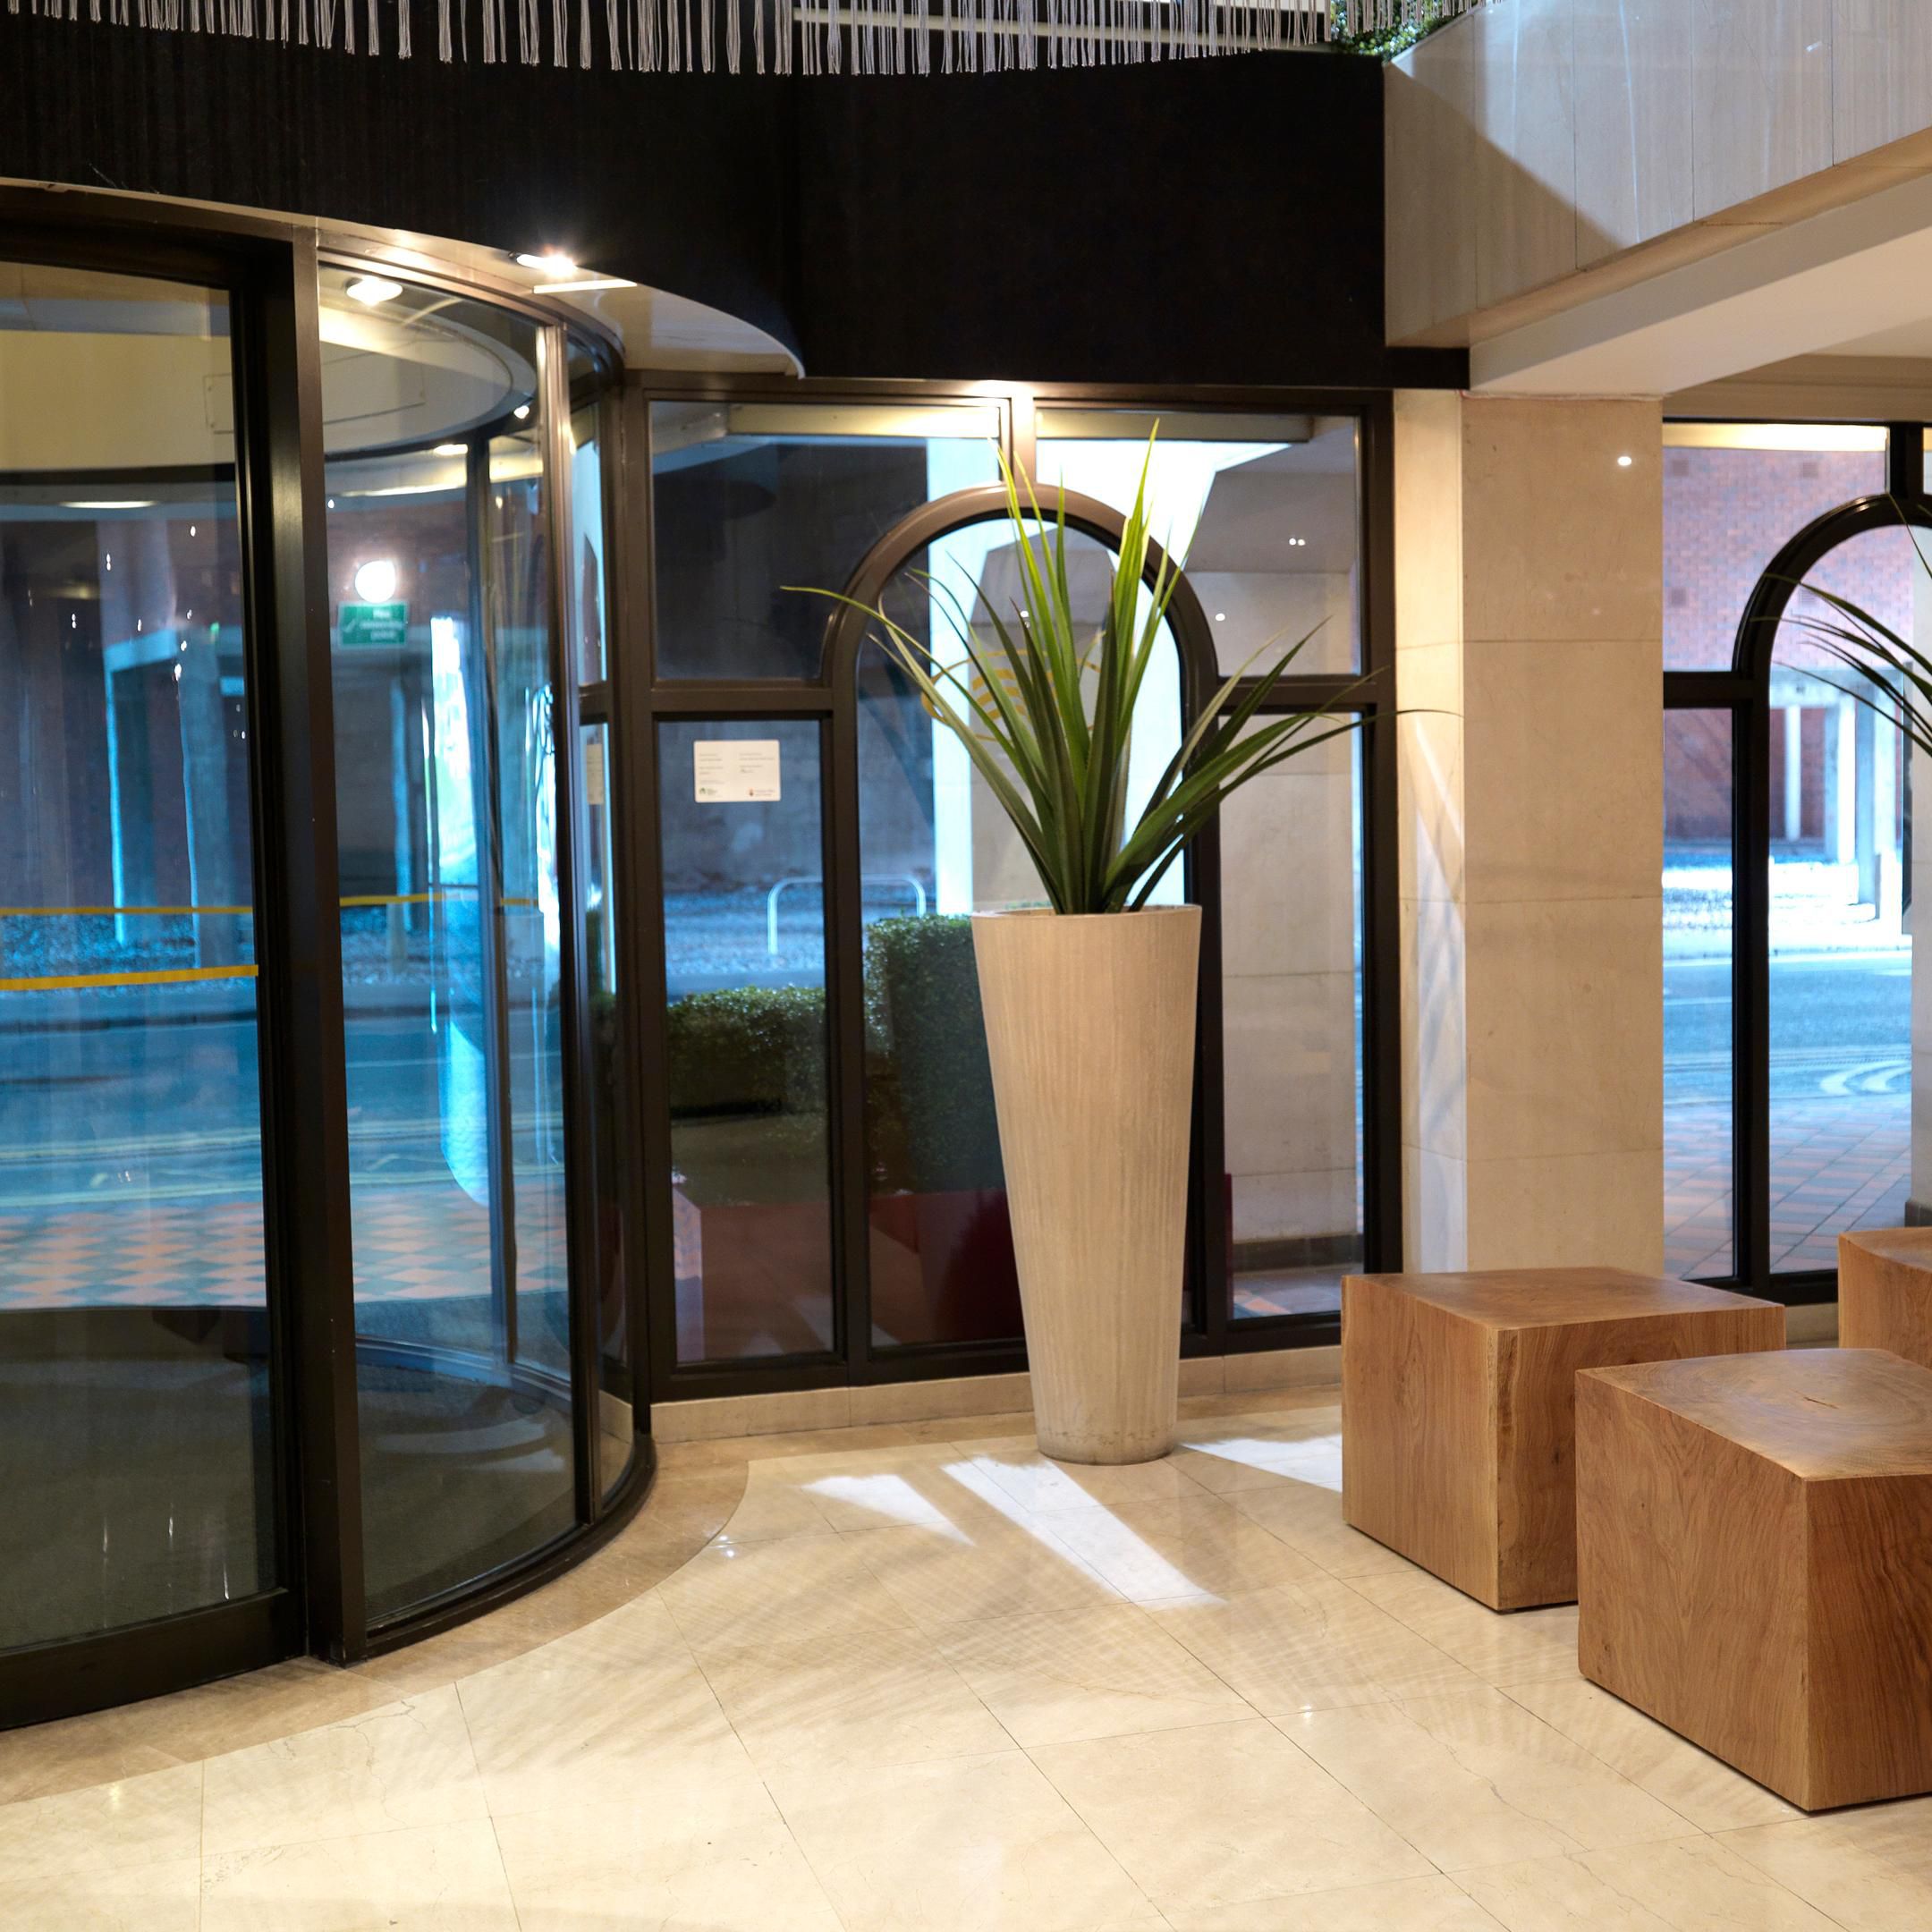 Hotel Entrance with carved wooden seats